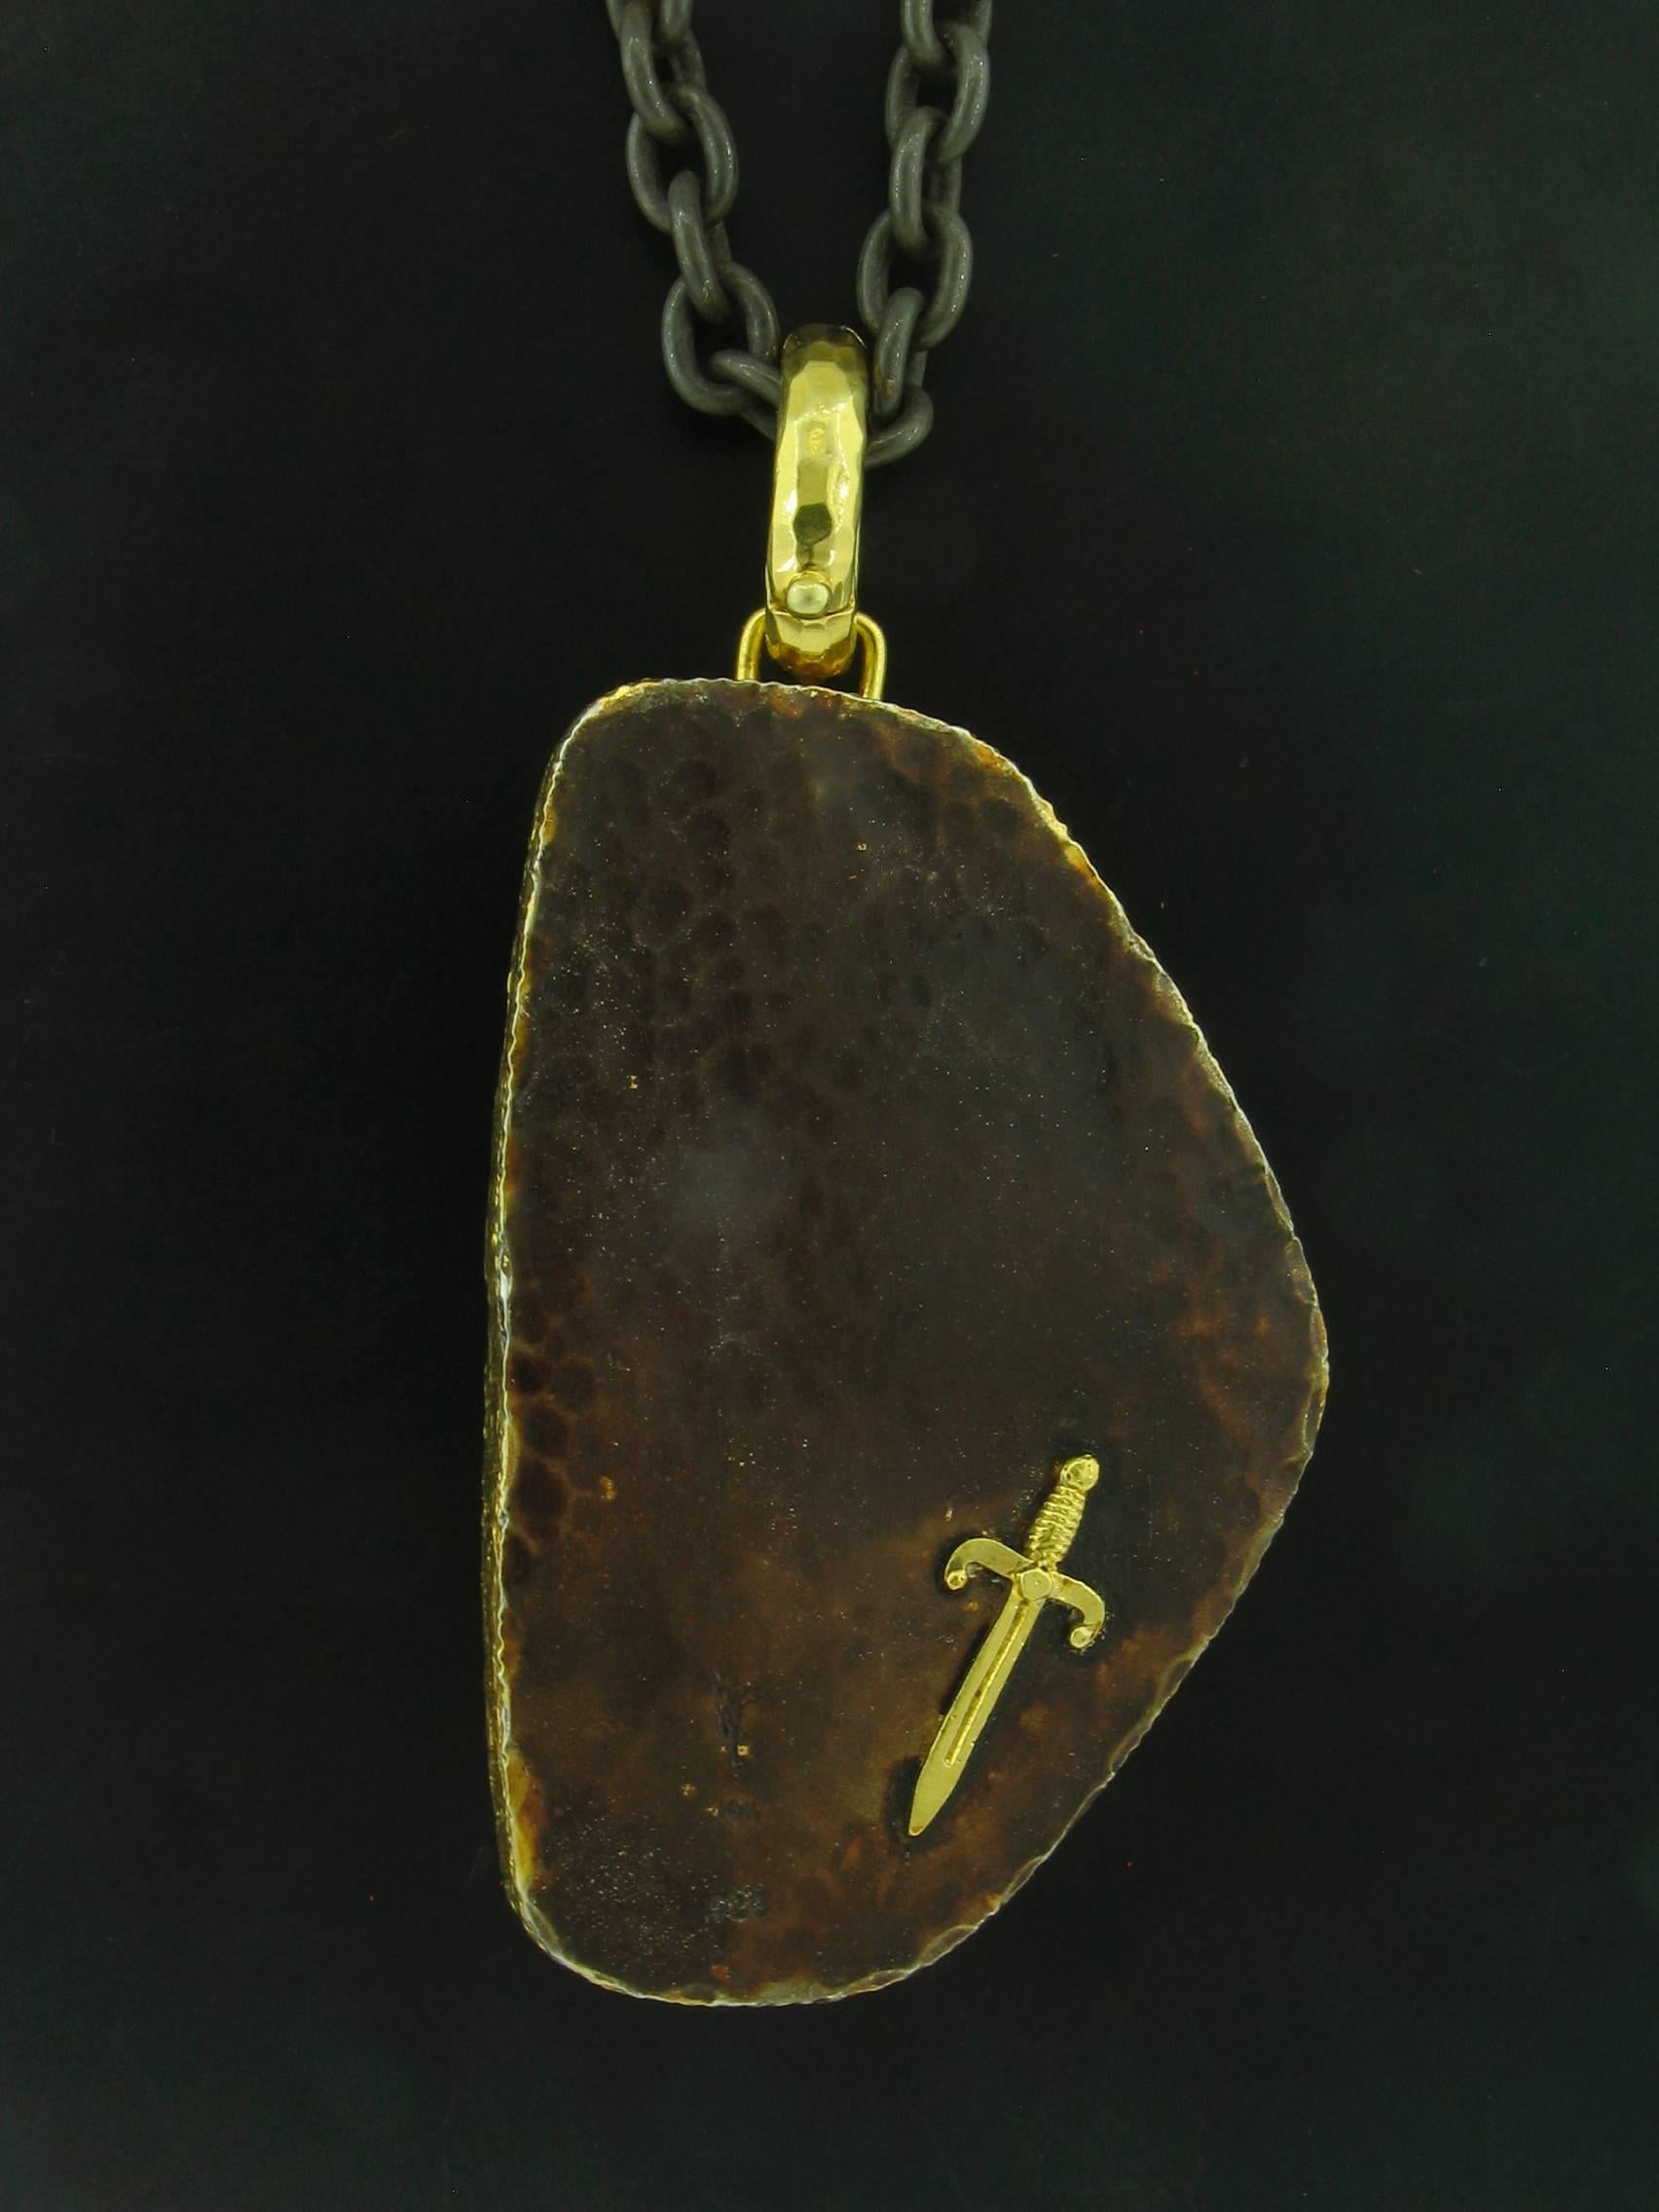 This Ammolite pendant was designed and made by well known designer Victor Velyan.  The Ammolite weighs 84.56 carats.  It is made of a base of pure Silver with all accent work created in 18k yellow gold. The 'brown' on the reverse is a proprietary